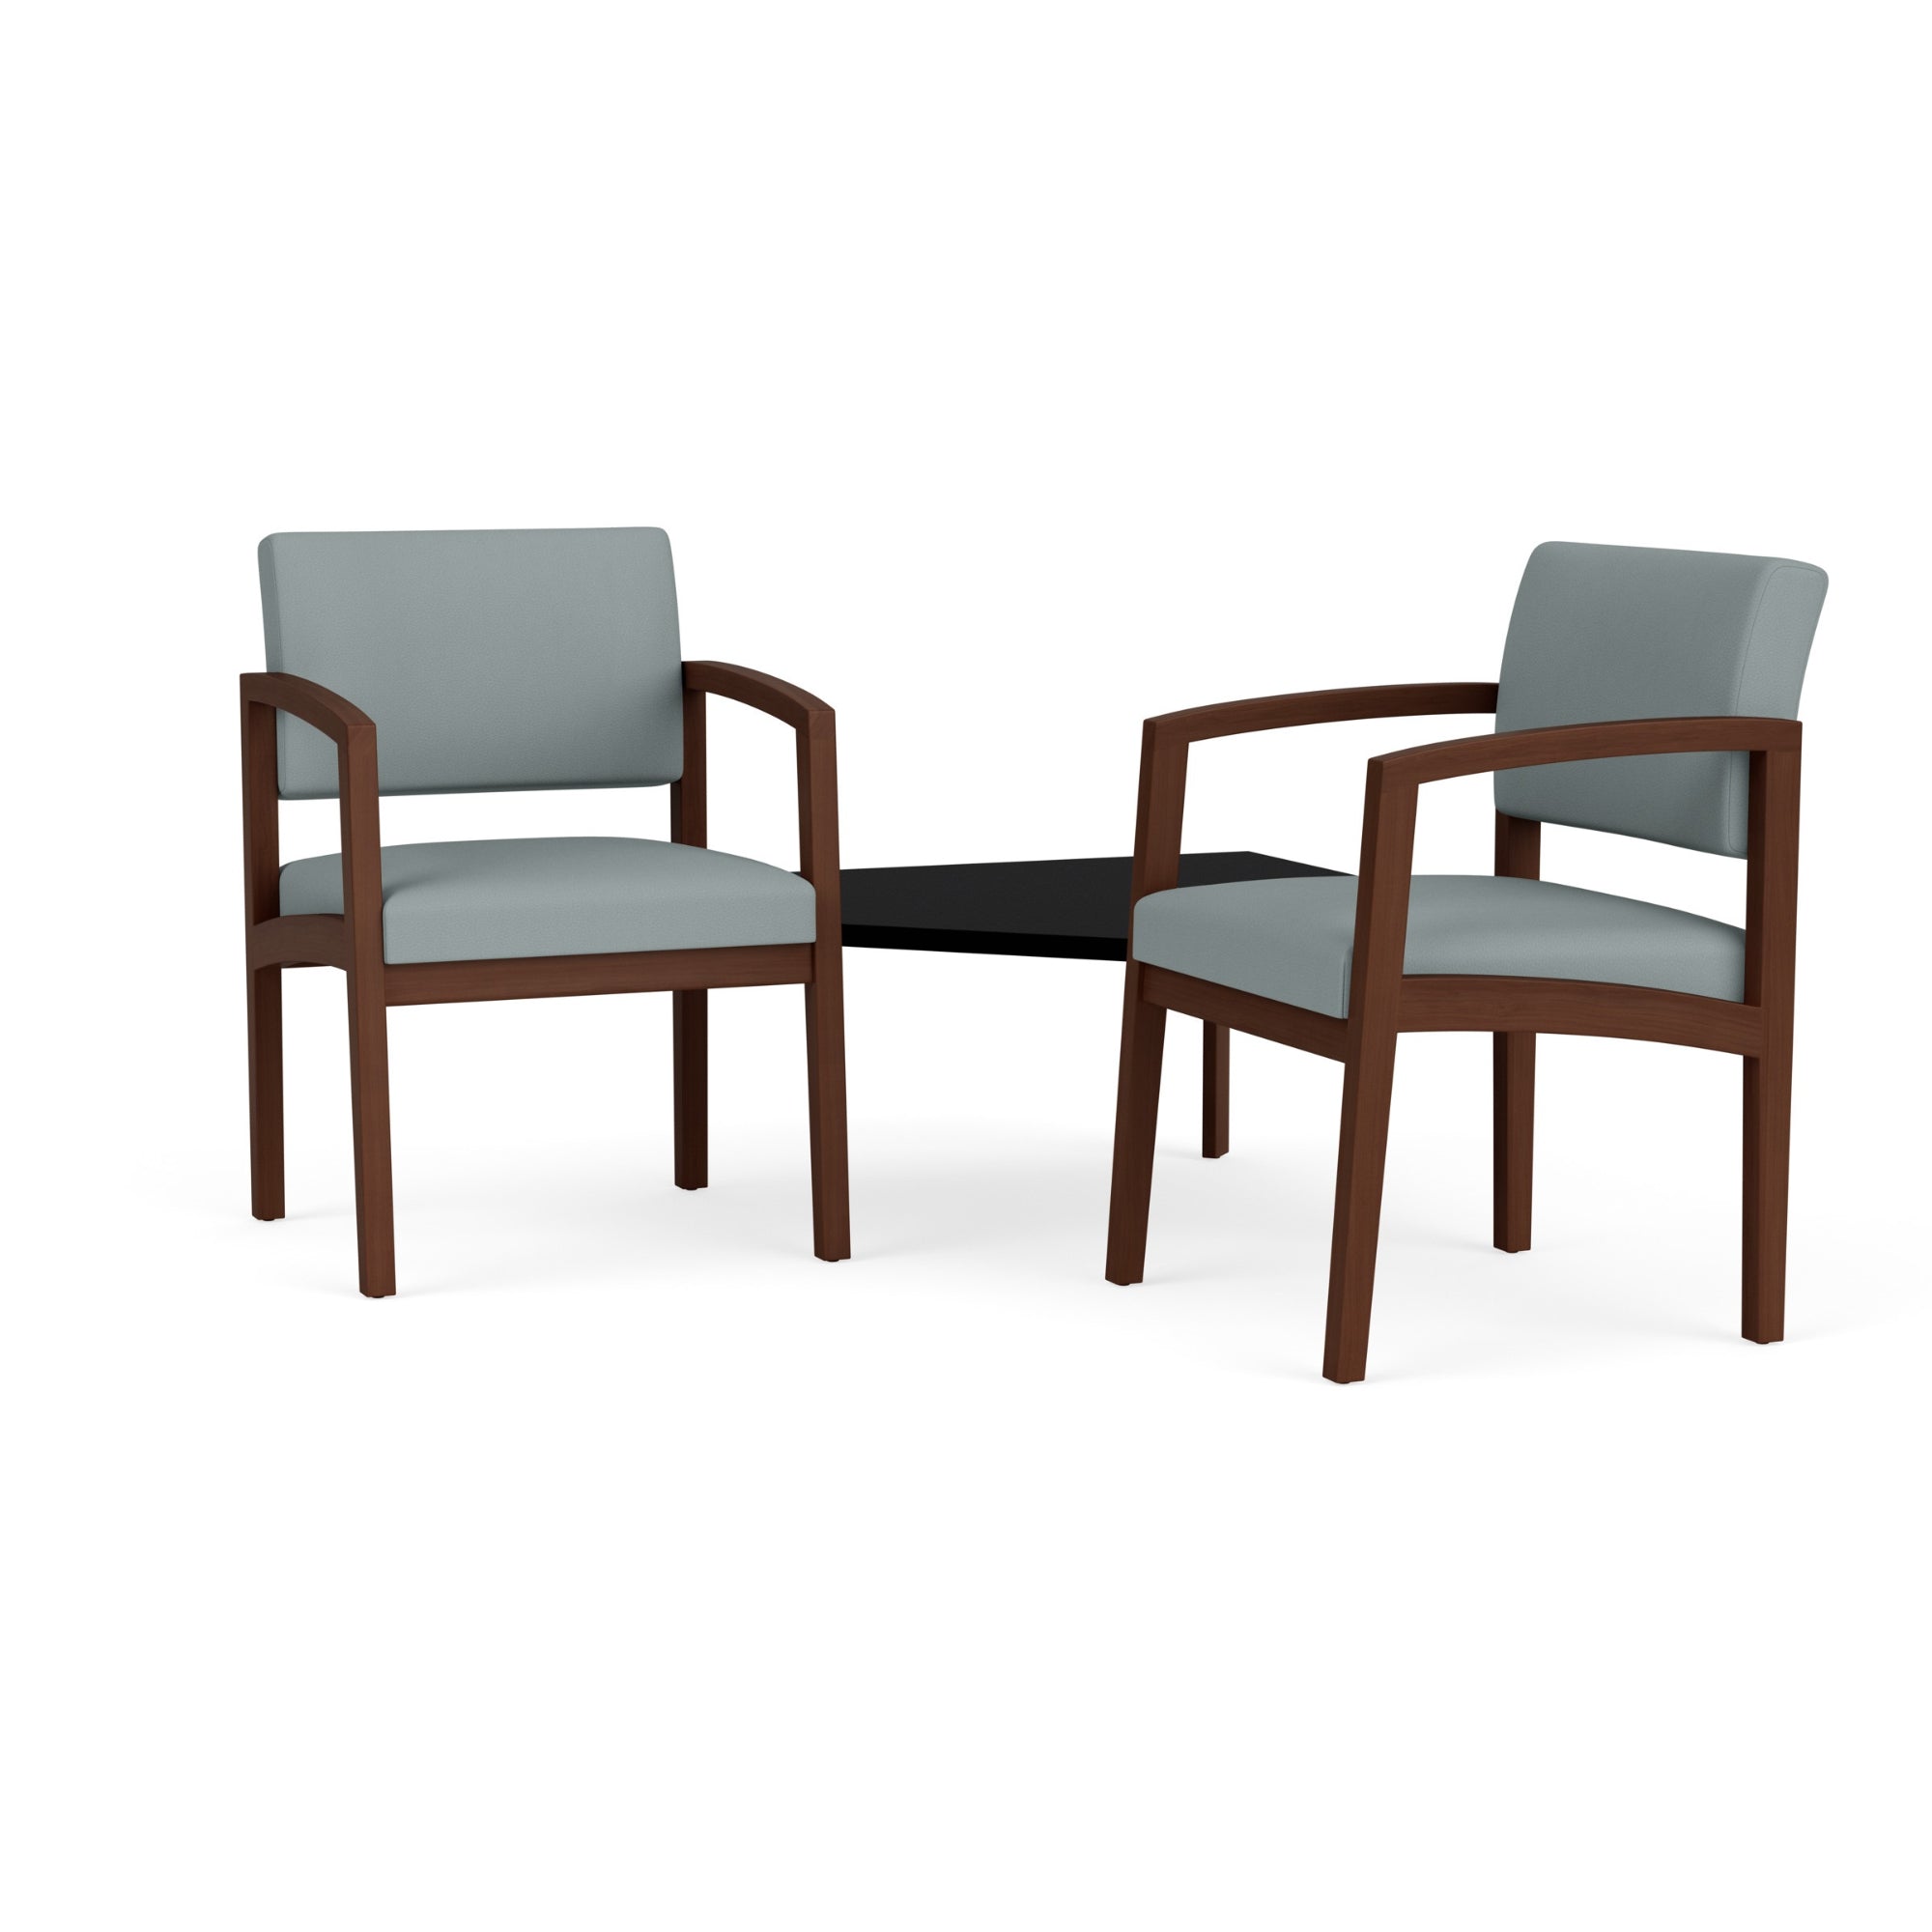 Lenox Wood Collection Reception Seating, 2 Chairs with Black Laminate Connecting Corner Table, Standard Fabric Upholstery, FREE SHIPPING